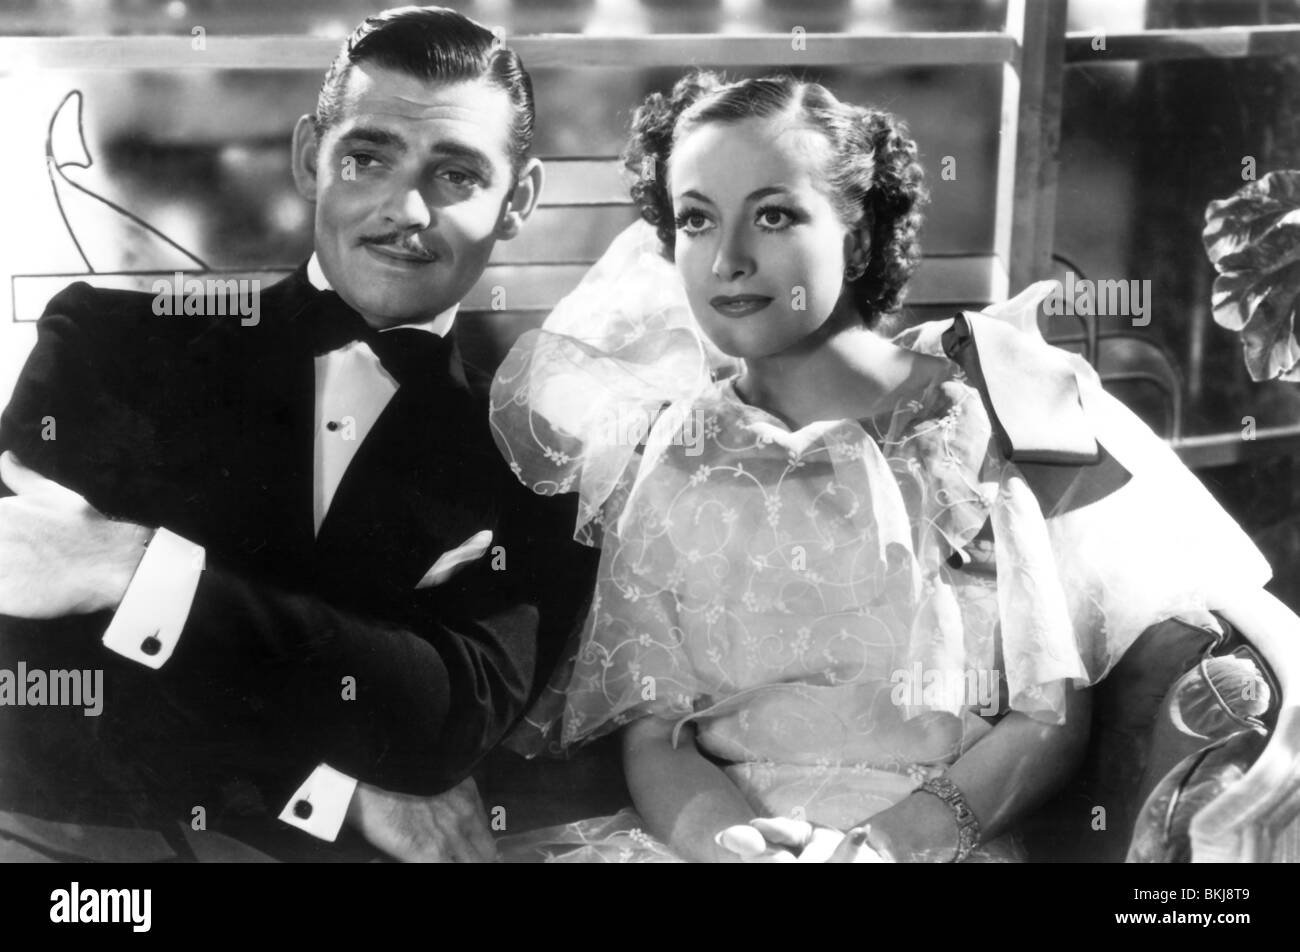 CHAINED (1934) CLARK GABLE, JOAN CRAWFORD, CLARENCE BROWN (DIR) CNED 001P Stock Photo